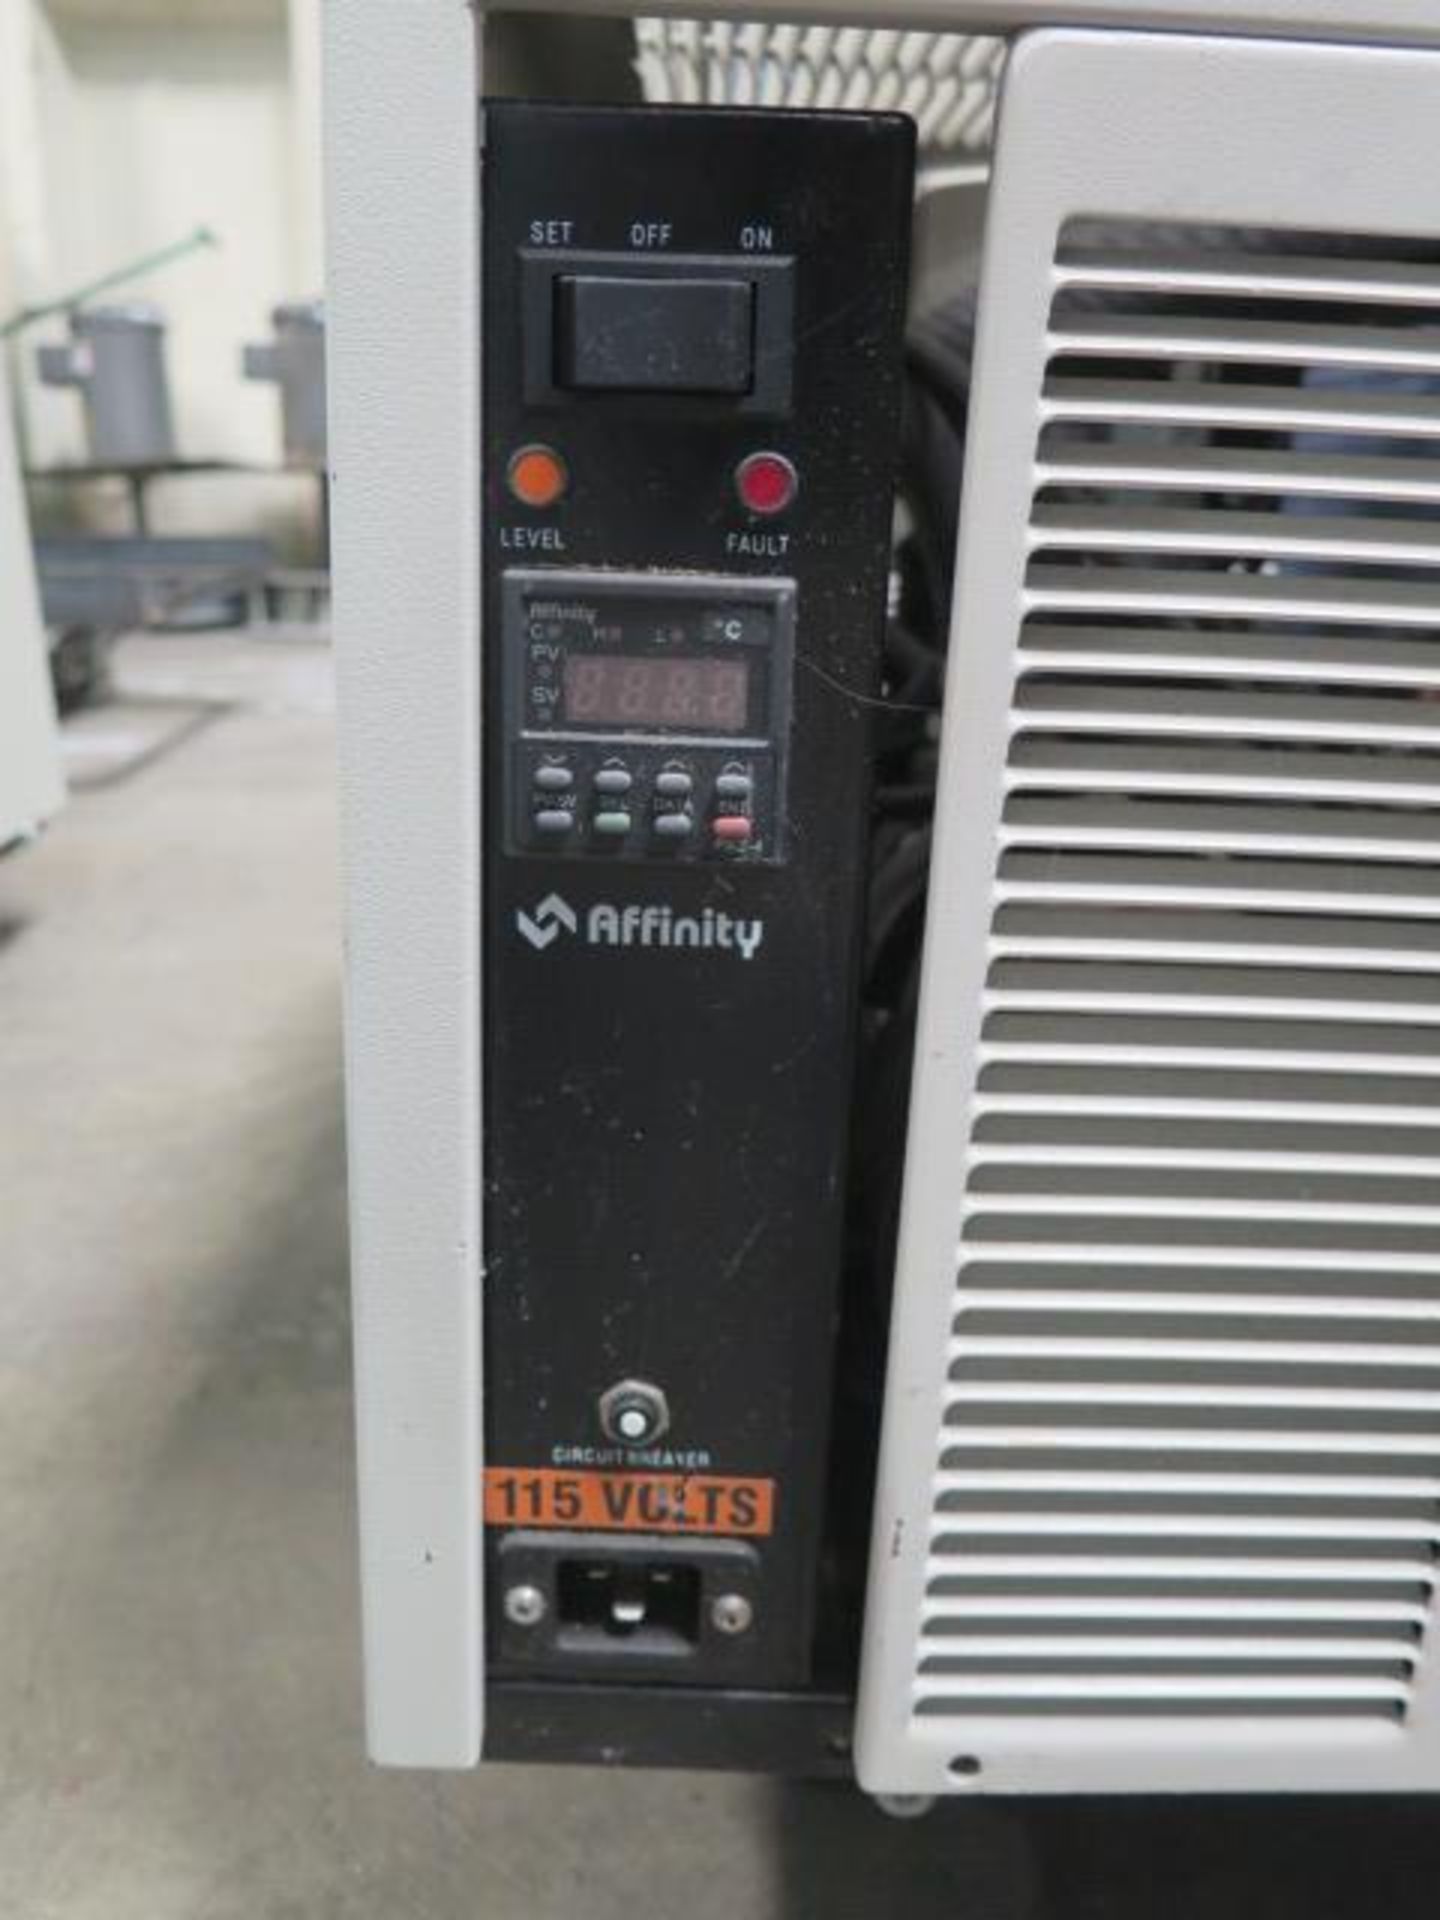 Affinity EWA-04AA-CD19CBM0 Water Cooled Heat Exchanger (SOLD AS-IS - NO WARRANTY) - Image 6 of 7